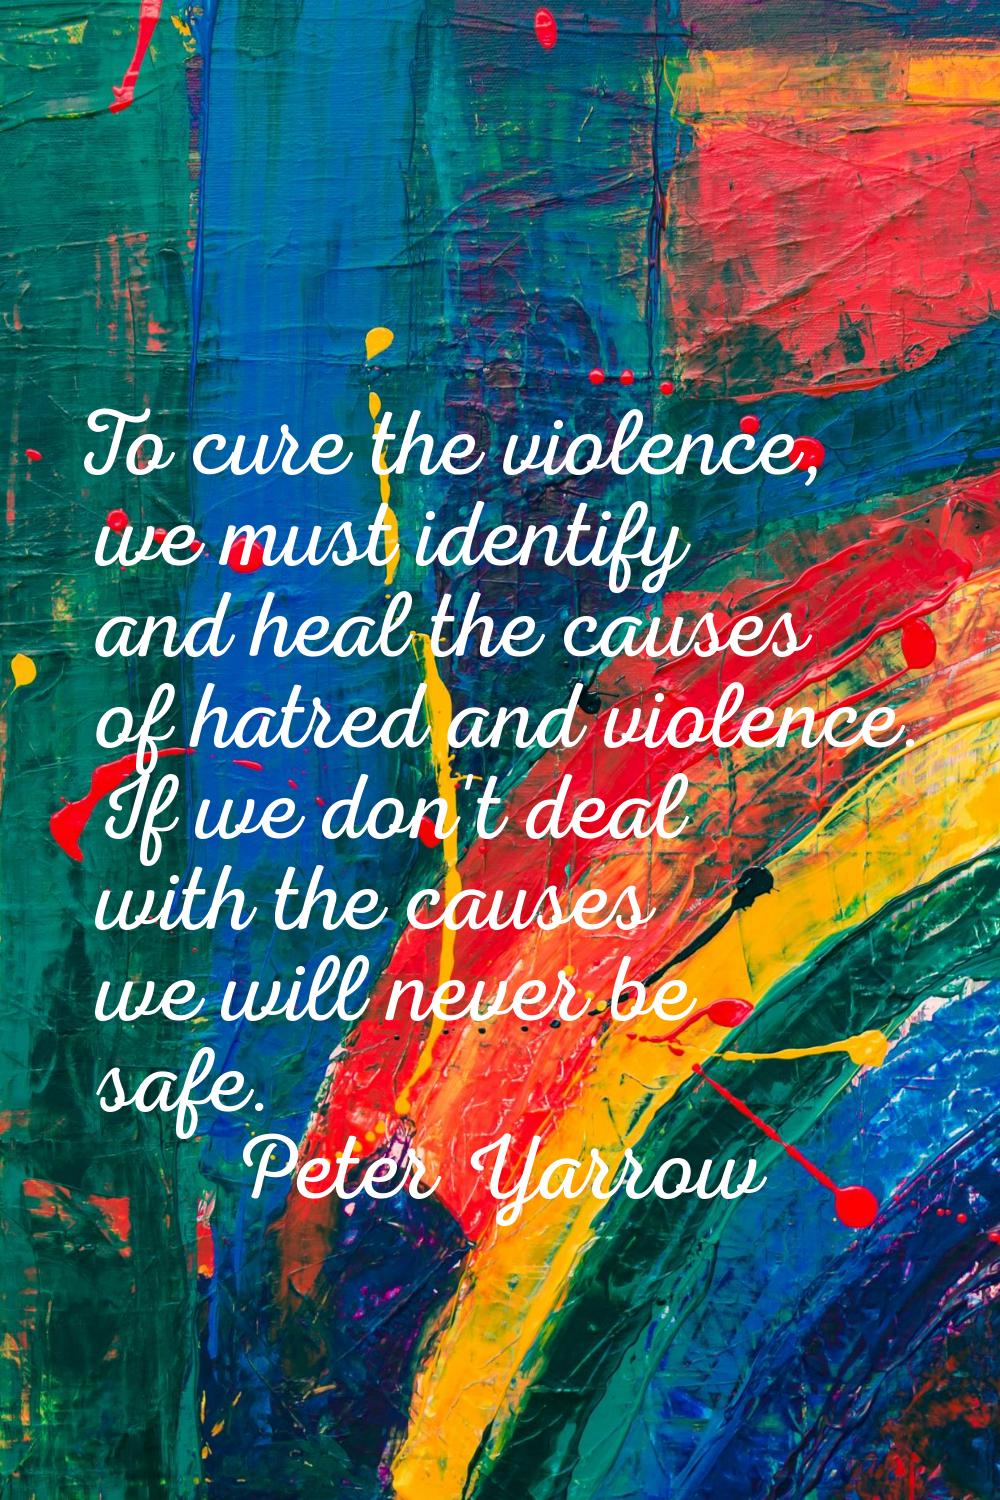 To cure the violence, we must identify and heal the causes of hatred and violence. If we don't deal